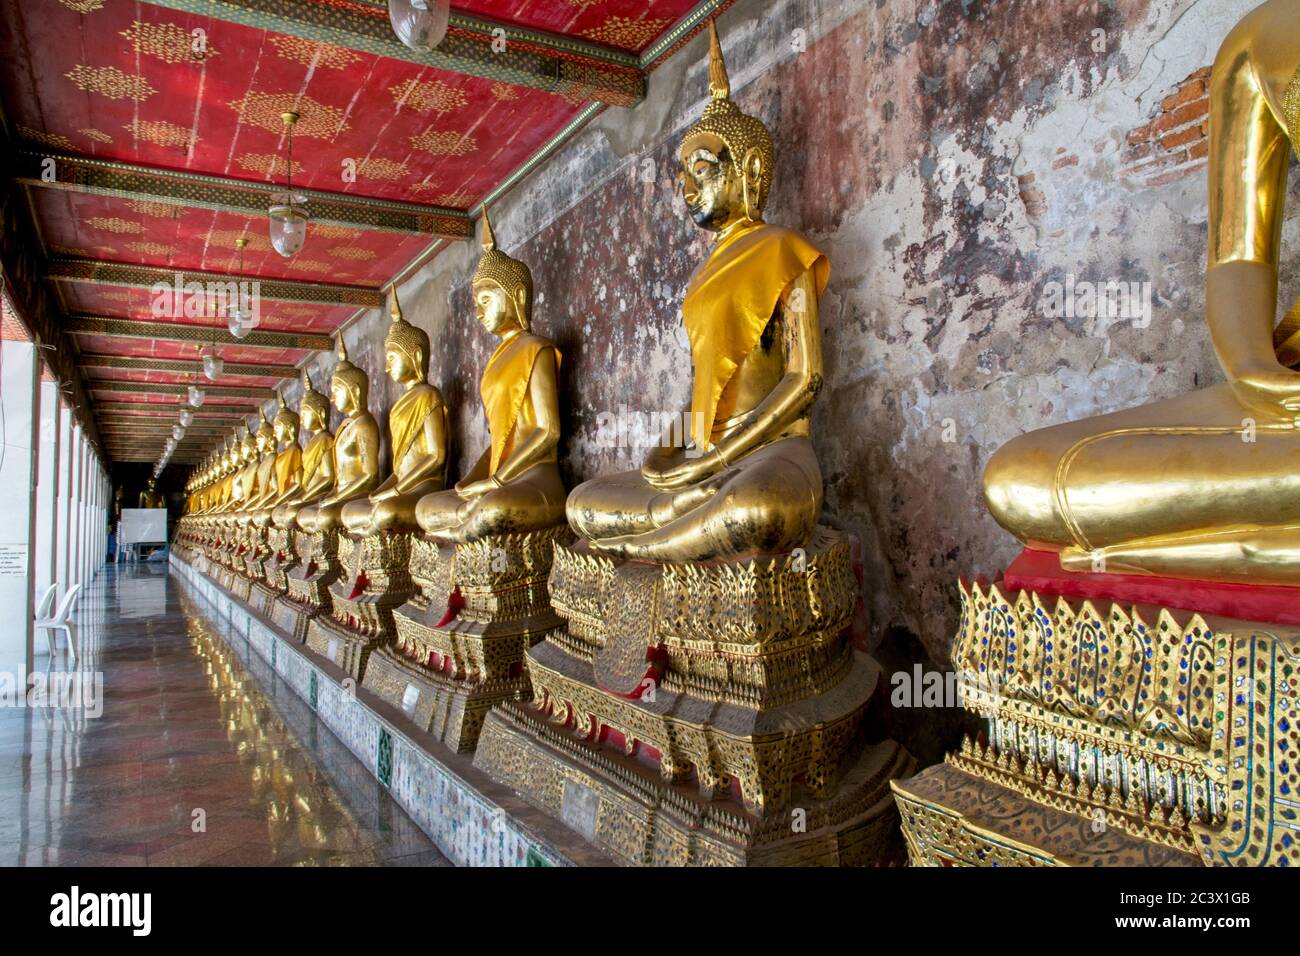 Wat Suthat Temple, buildings and Meditation Bhudda statues. Row of seated gold gilded buddha icons Under cover Receding front to back Stock Photo